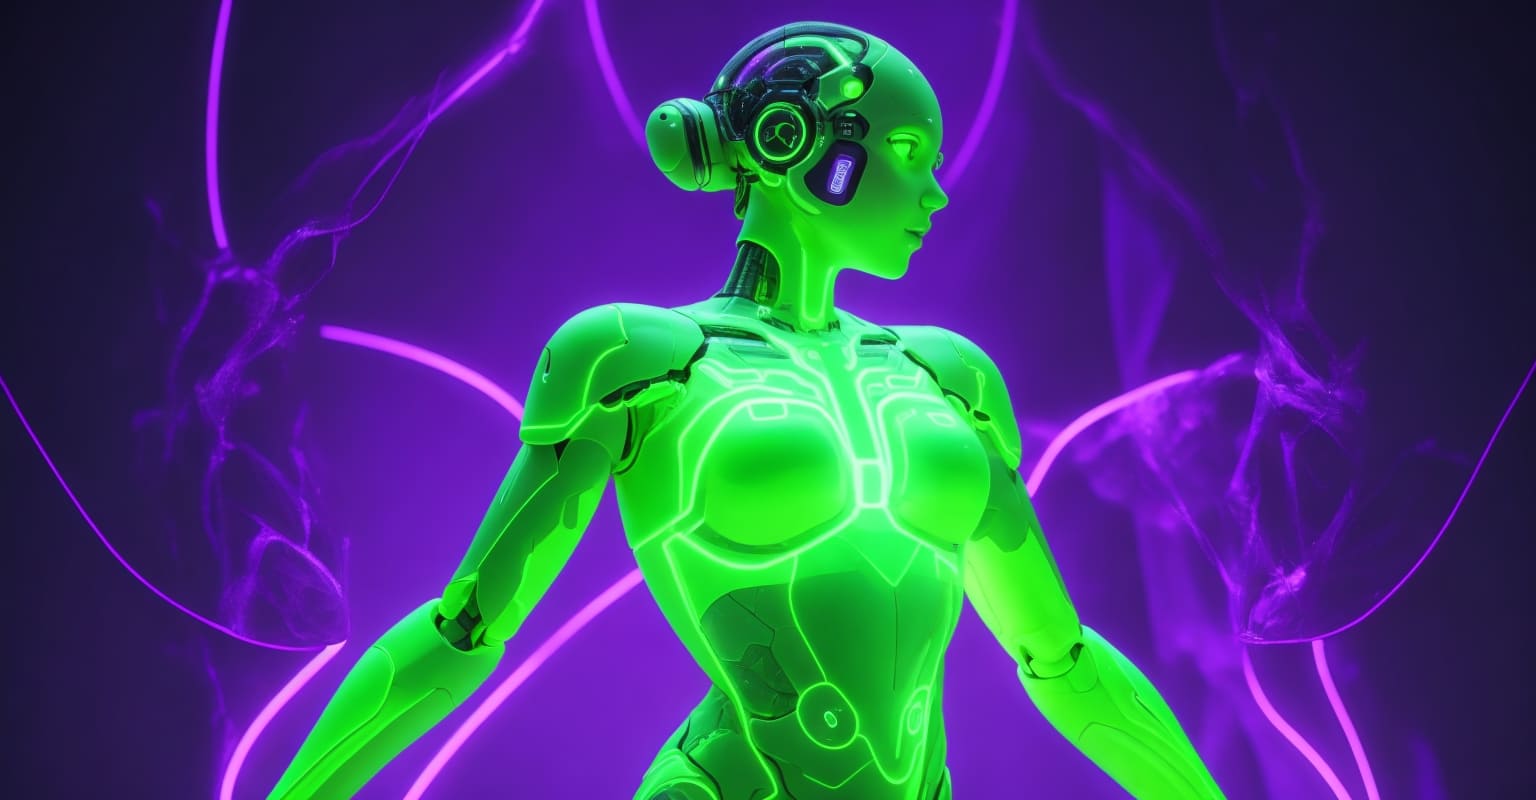 DreamShaper_v7_A_human_figure_illuminated_by_a_neon_green_and_1 (1)